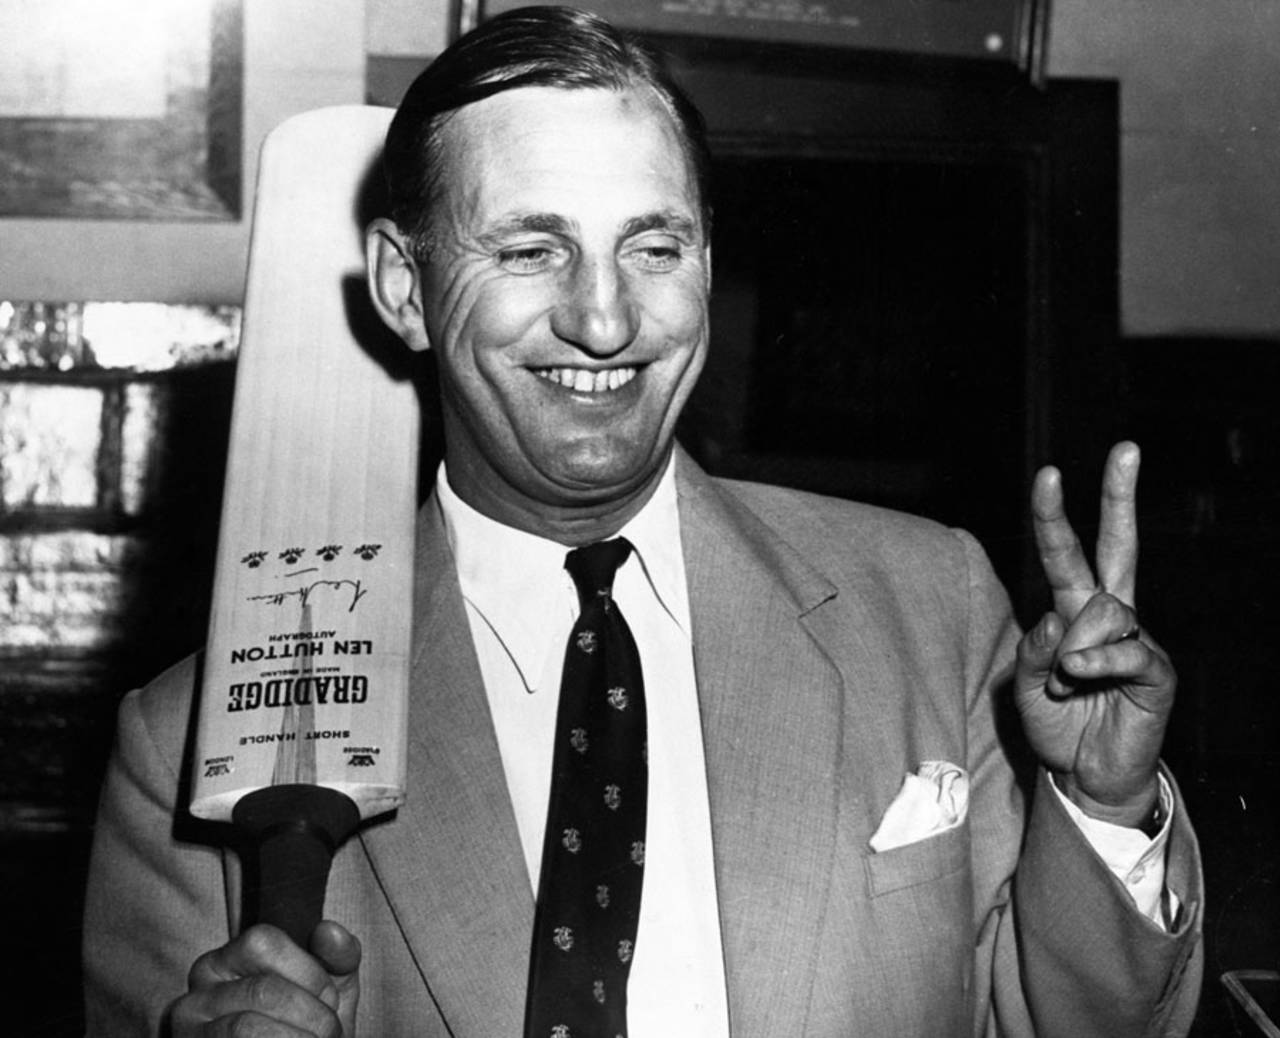 England captain Len Hutton showing his pleasure after the five wicket win over Australia in the 4th Test at Adelaide, February 7, 1955